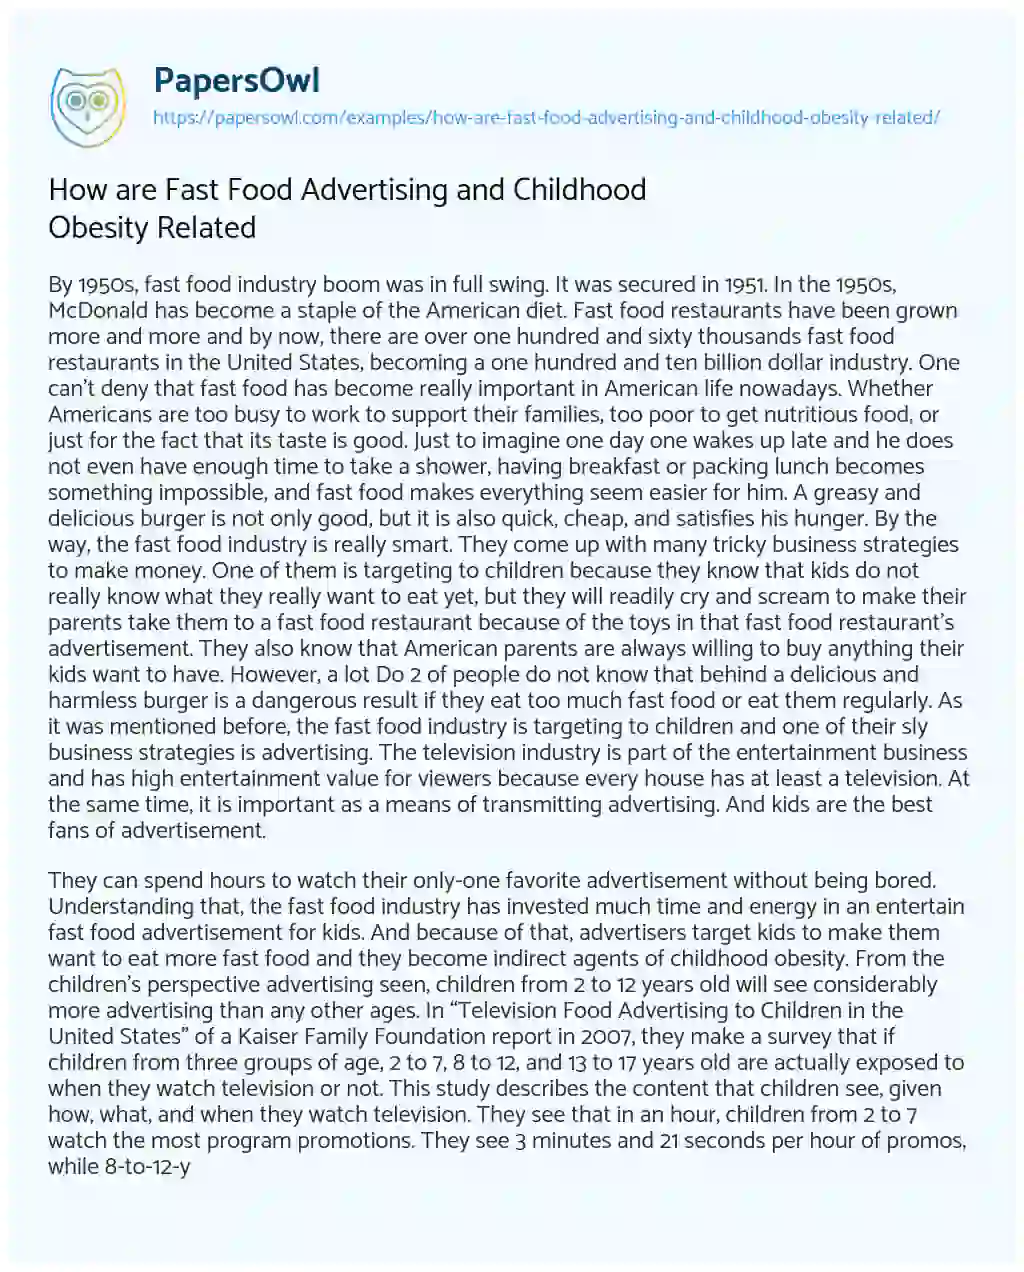 Essay on How are Fast Food Advertising and Childhood Obesity Related